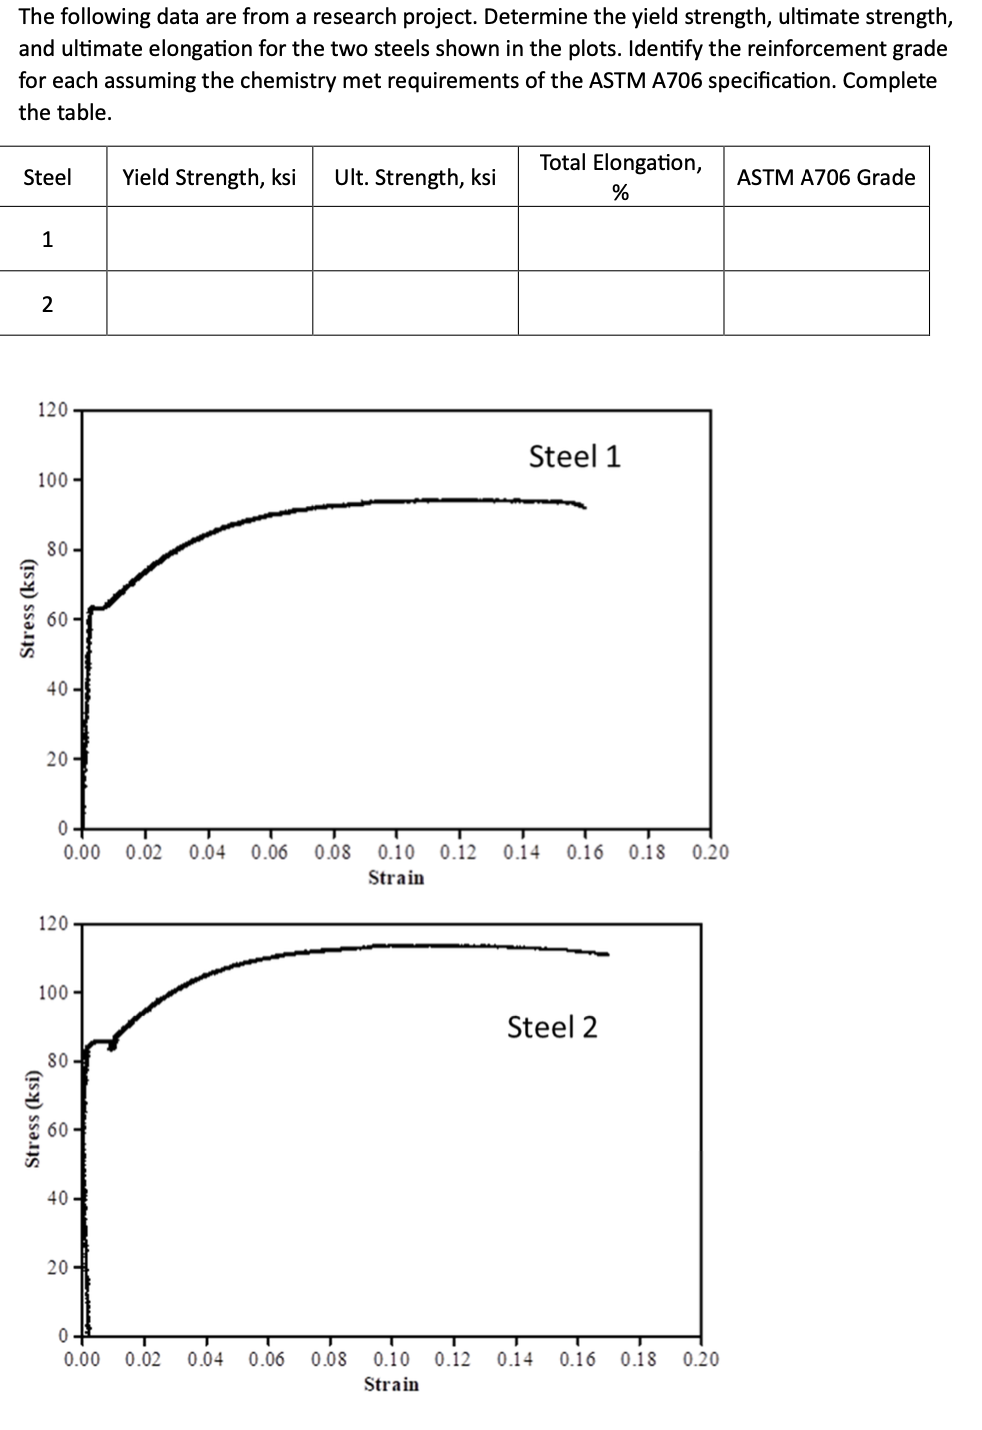 The following data are from a research project. Determine the yield strength, ultimate strength,
and ultimate elongation for the two steels shown in the plots. Identify the reinforcement grade
for each assuming the chemistry met requirements of the ASTM A706 specification. Complete
the table.
Steel Yield Strength, ksi Ult. Strength, ksi
Stress (ksi)
1
2
120
100-
80-
Stress (ksi)
60-
40
20-
0+
0.00 0.02 0.04
120
100
80
40-
20-
0.06 0.08 0.10 0.12
Strain
0+
0.00 0.02 0.04 0.06 0.08
Total Elongation,
%
Steel 1
0.14 0.16 0.18 0.20
Steel 2
0.10 0.12 0.14 0.16 0.18 0.20
Strain
ASTM A706 Grade